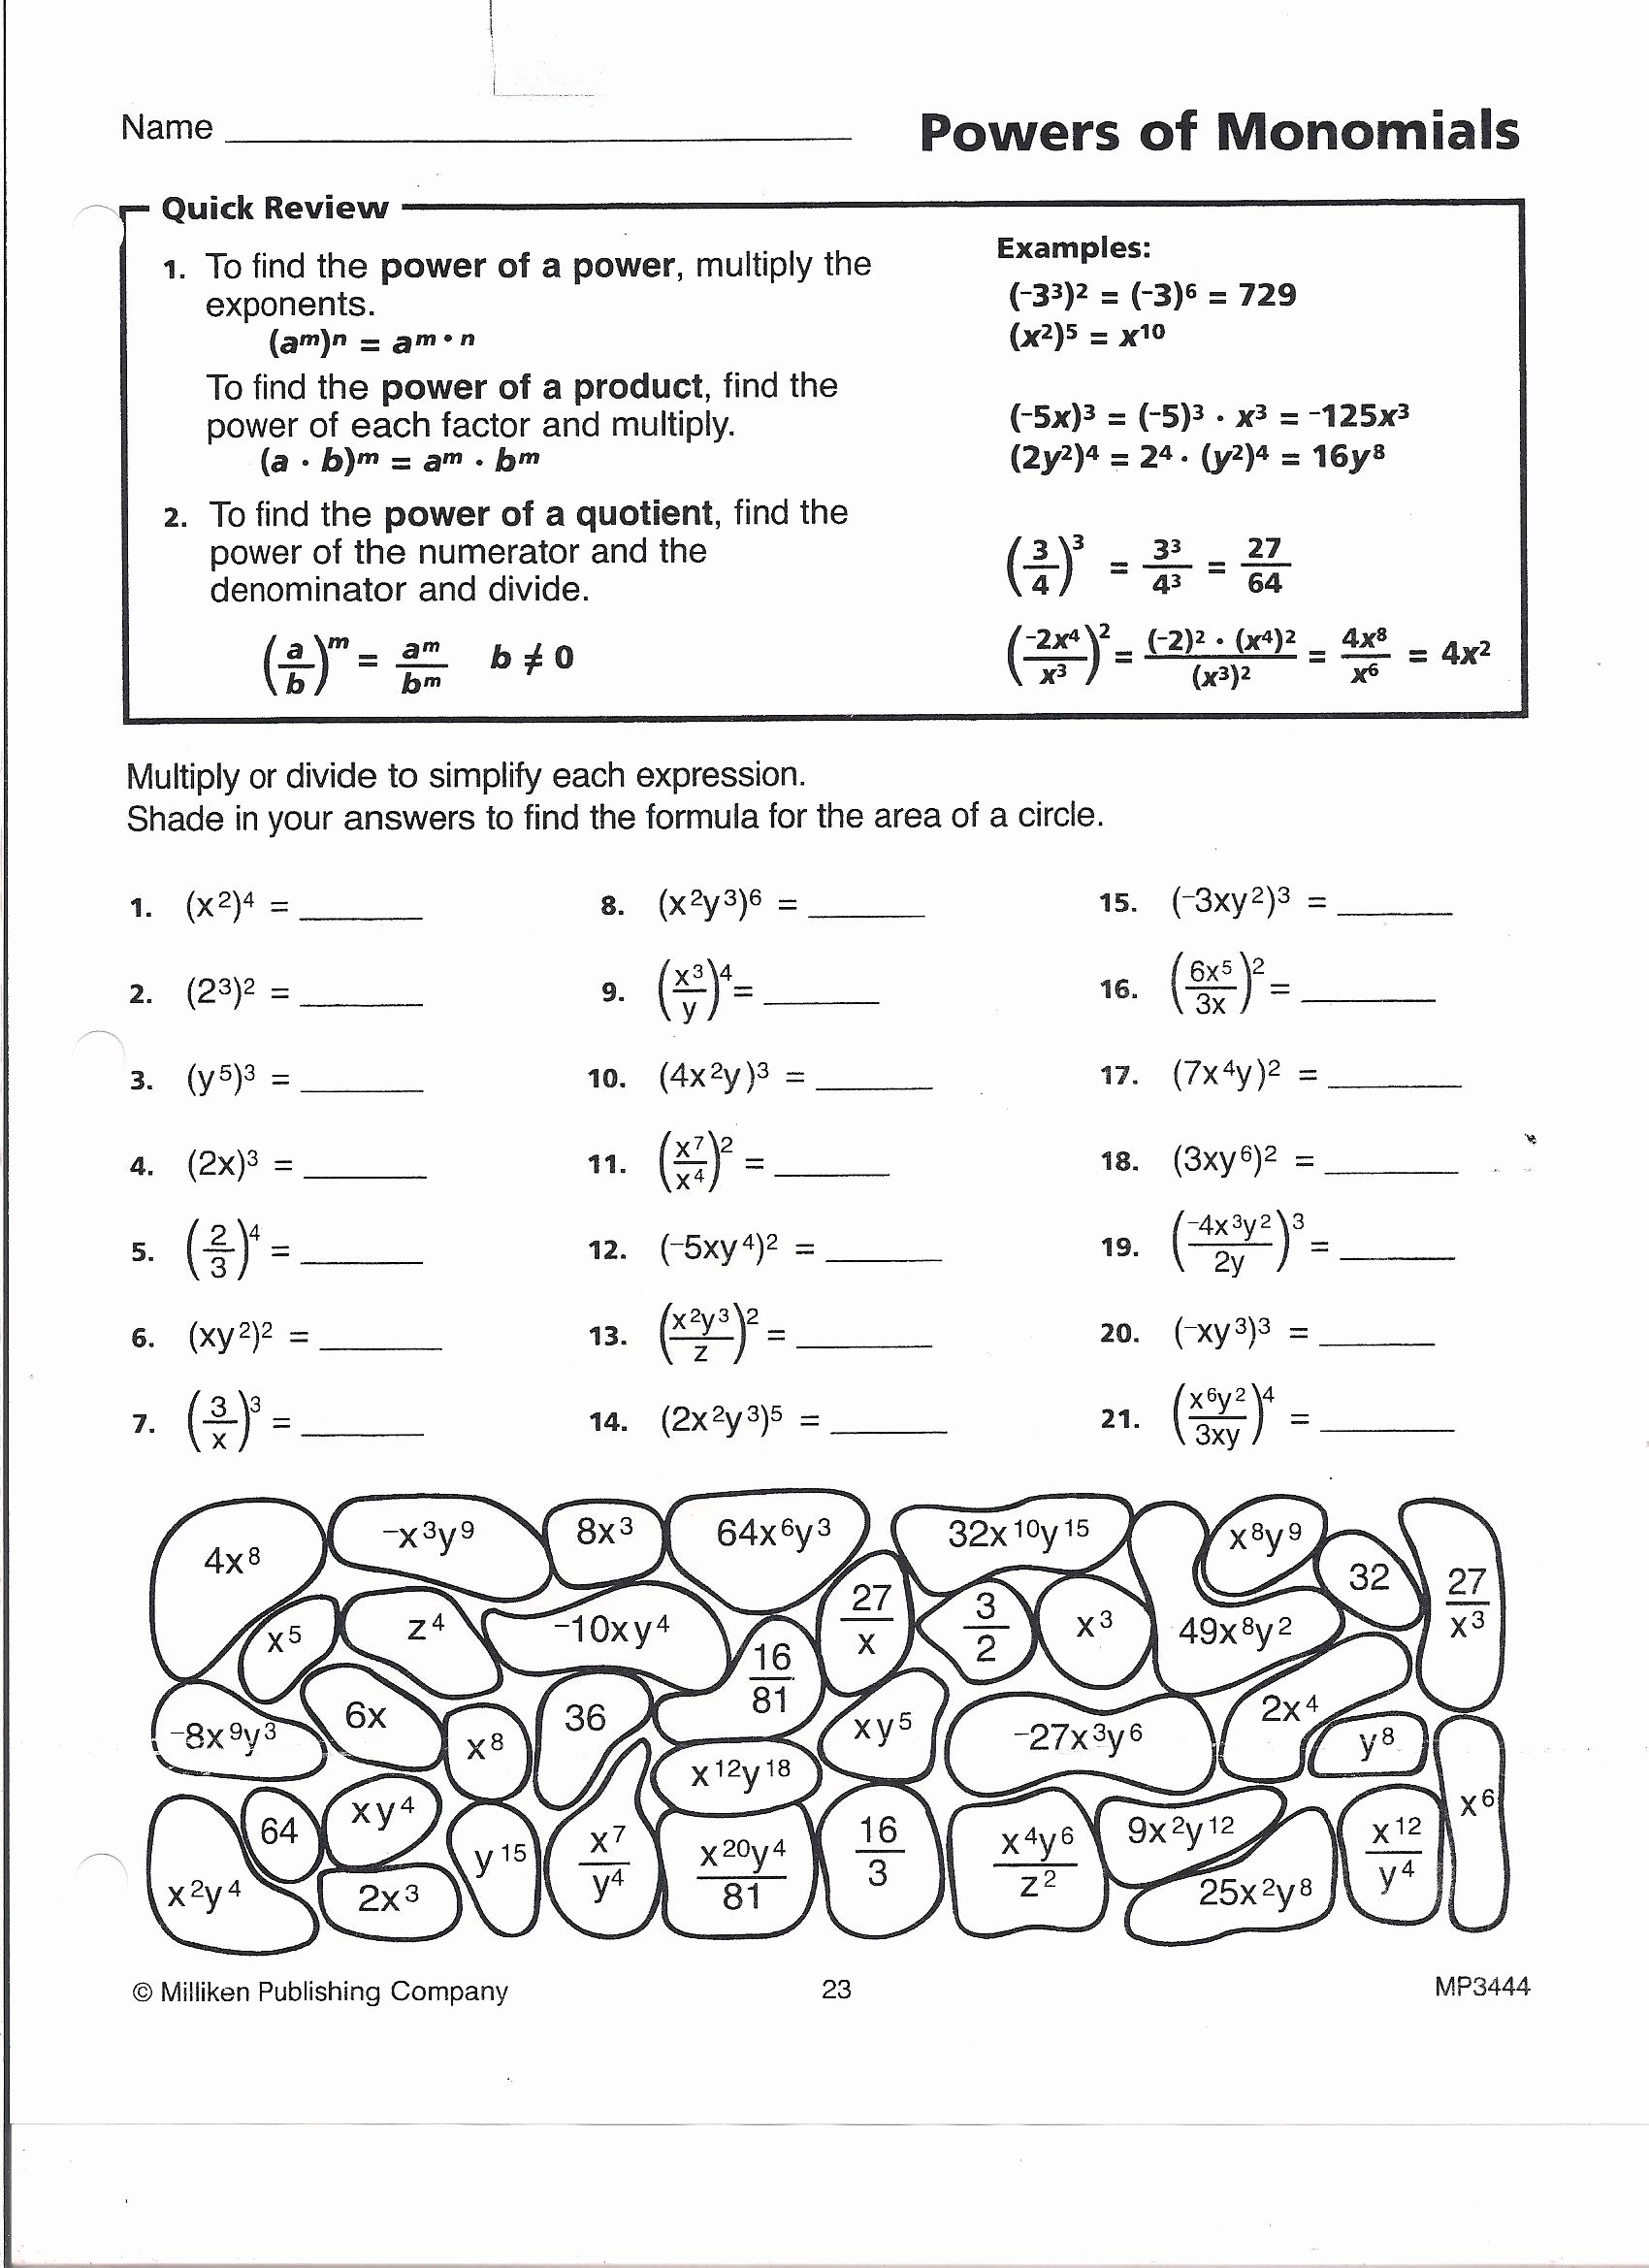 Multiplying Polynomials Worksheet Answers Lovely Powers Monomials Worksheet Answers Worksheets for Kids